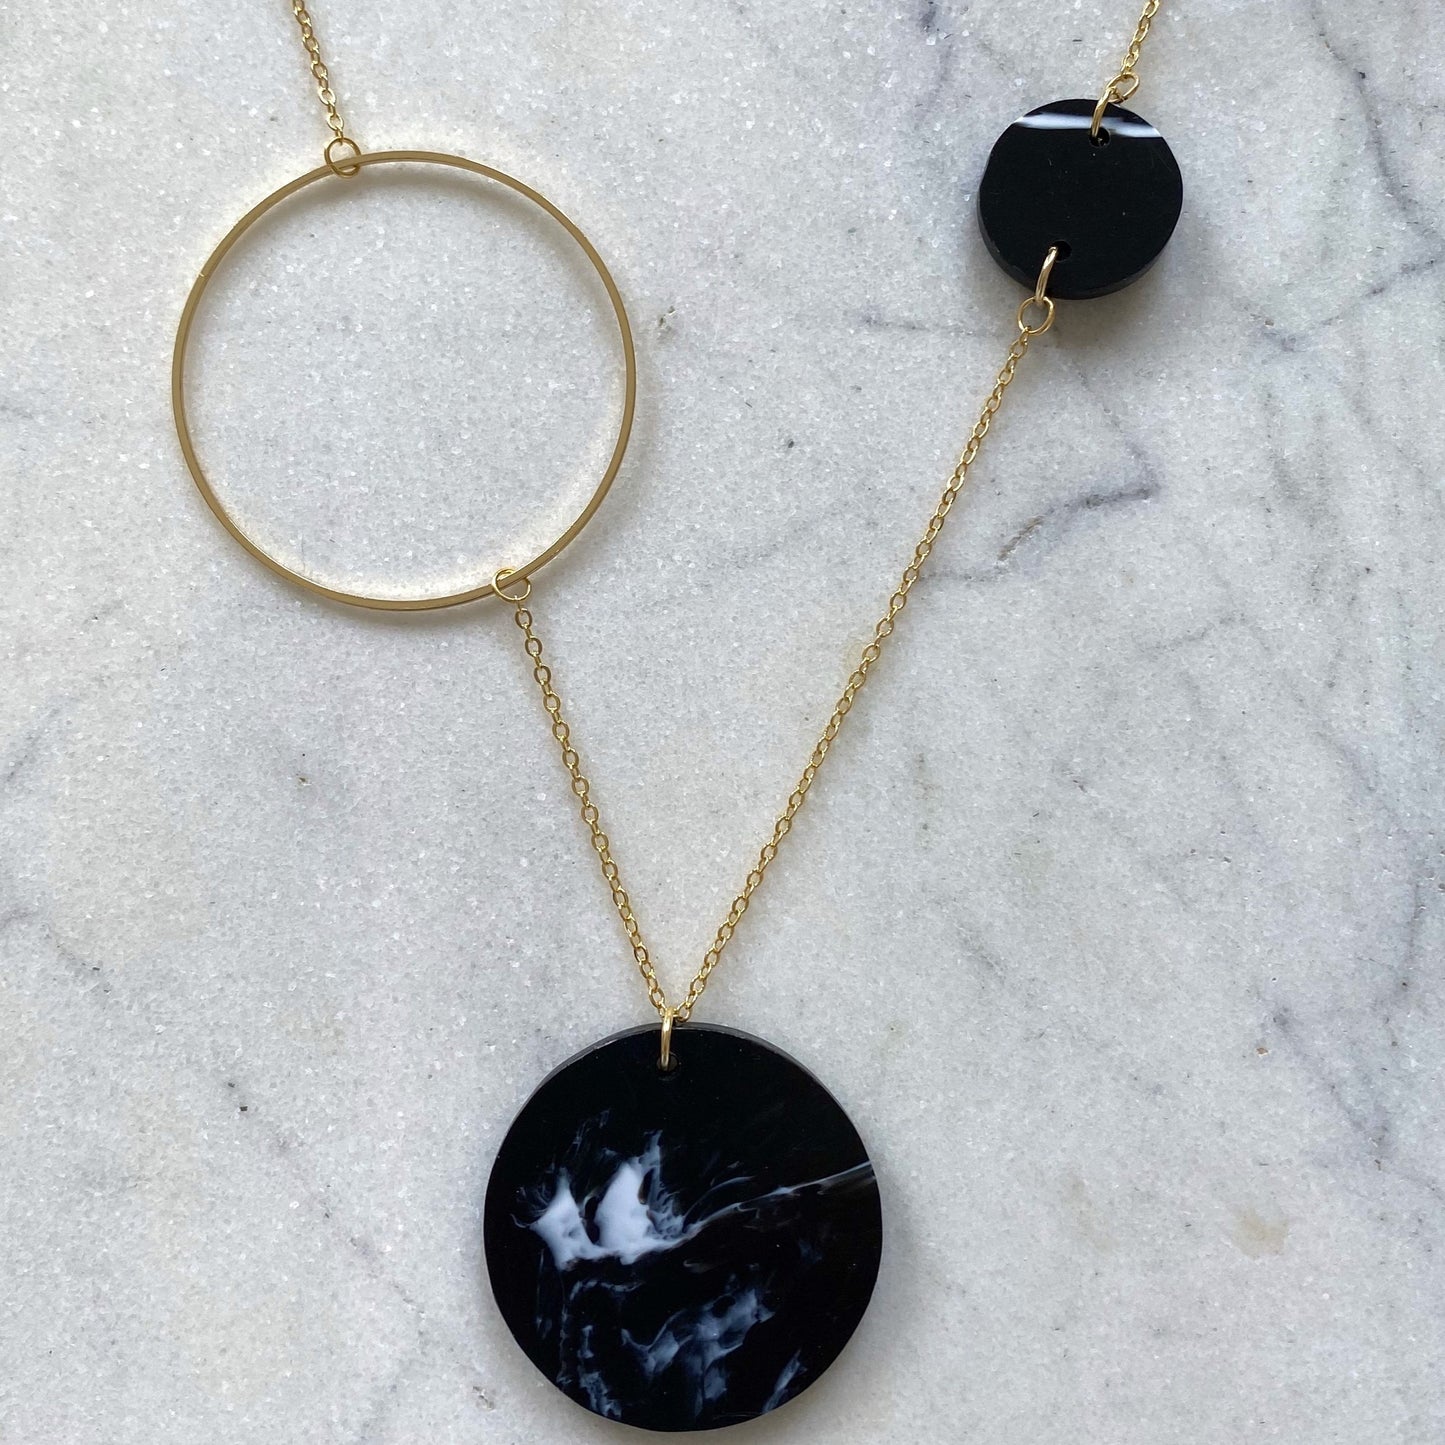 Constellation Necklace- Black & white marble